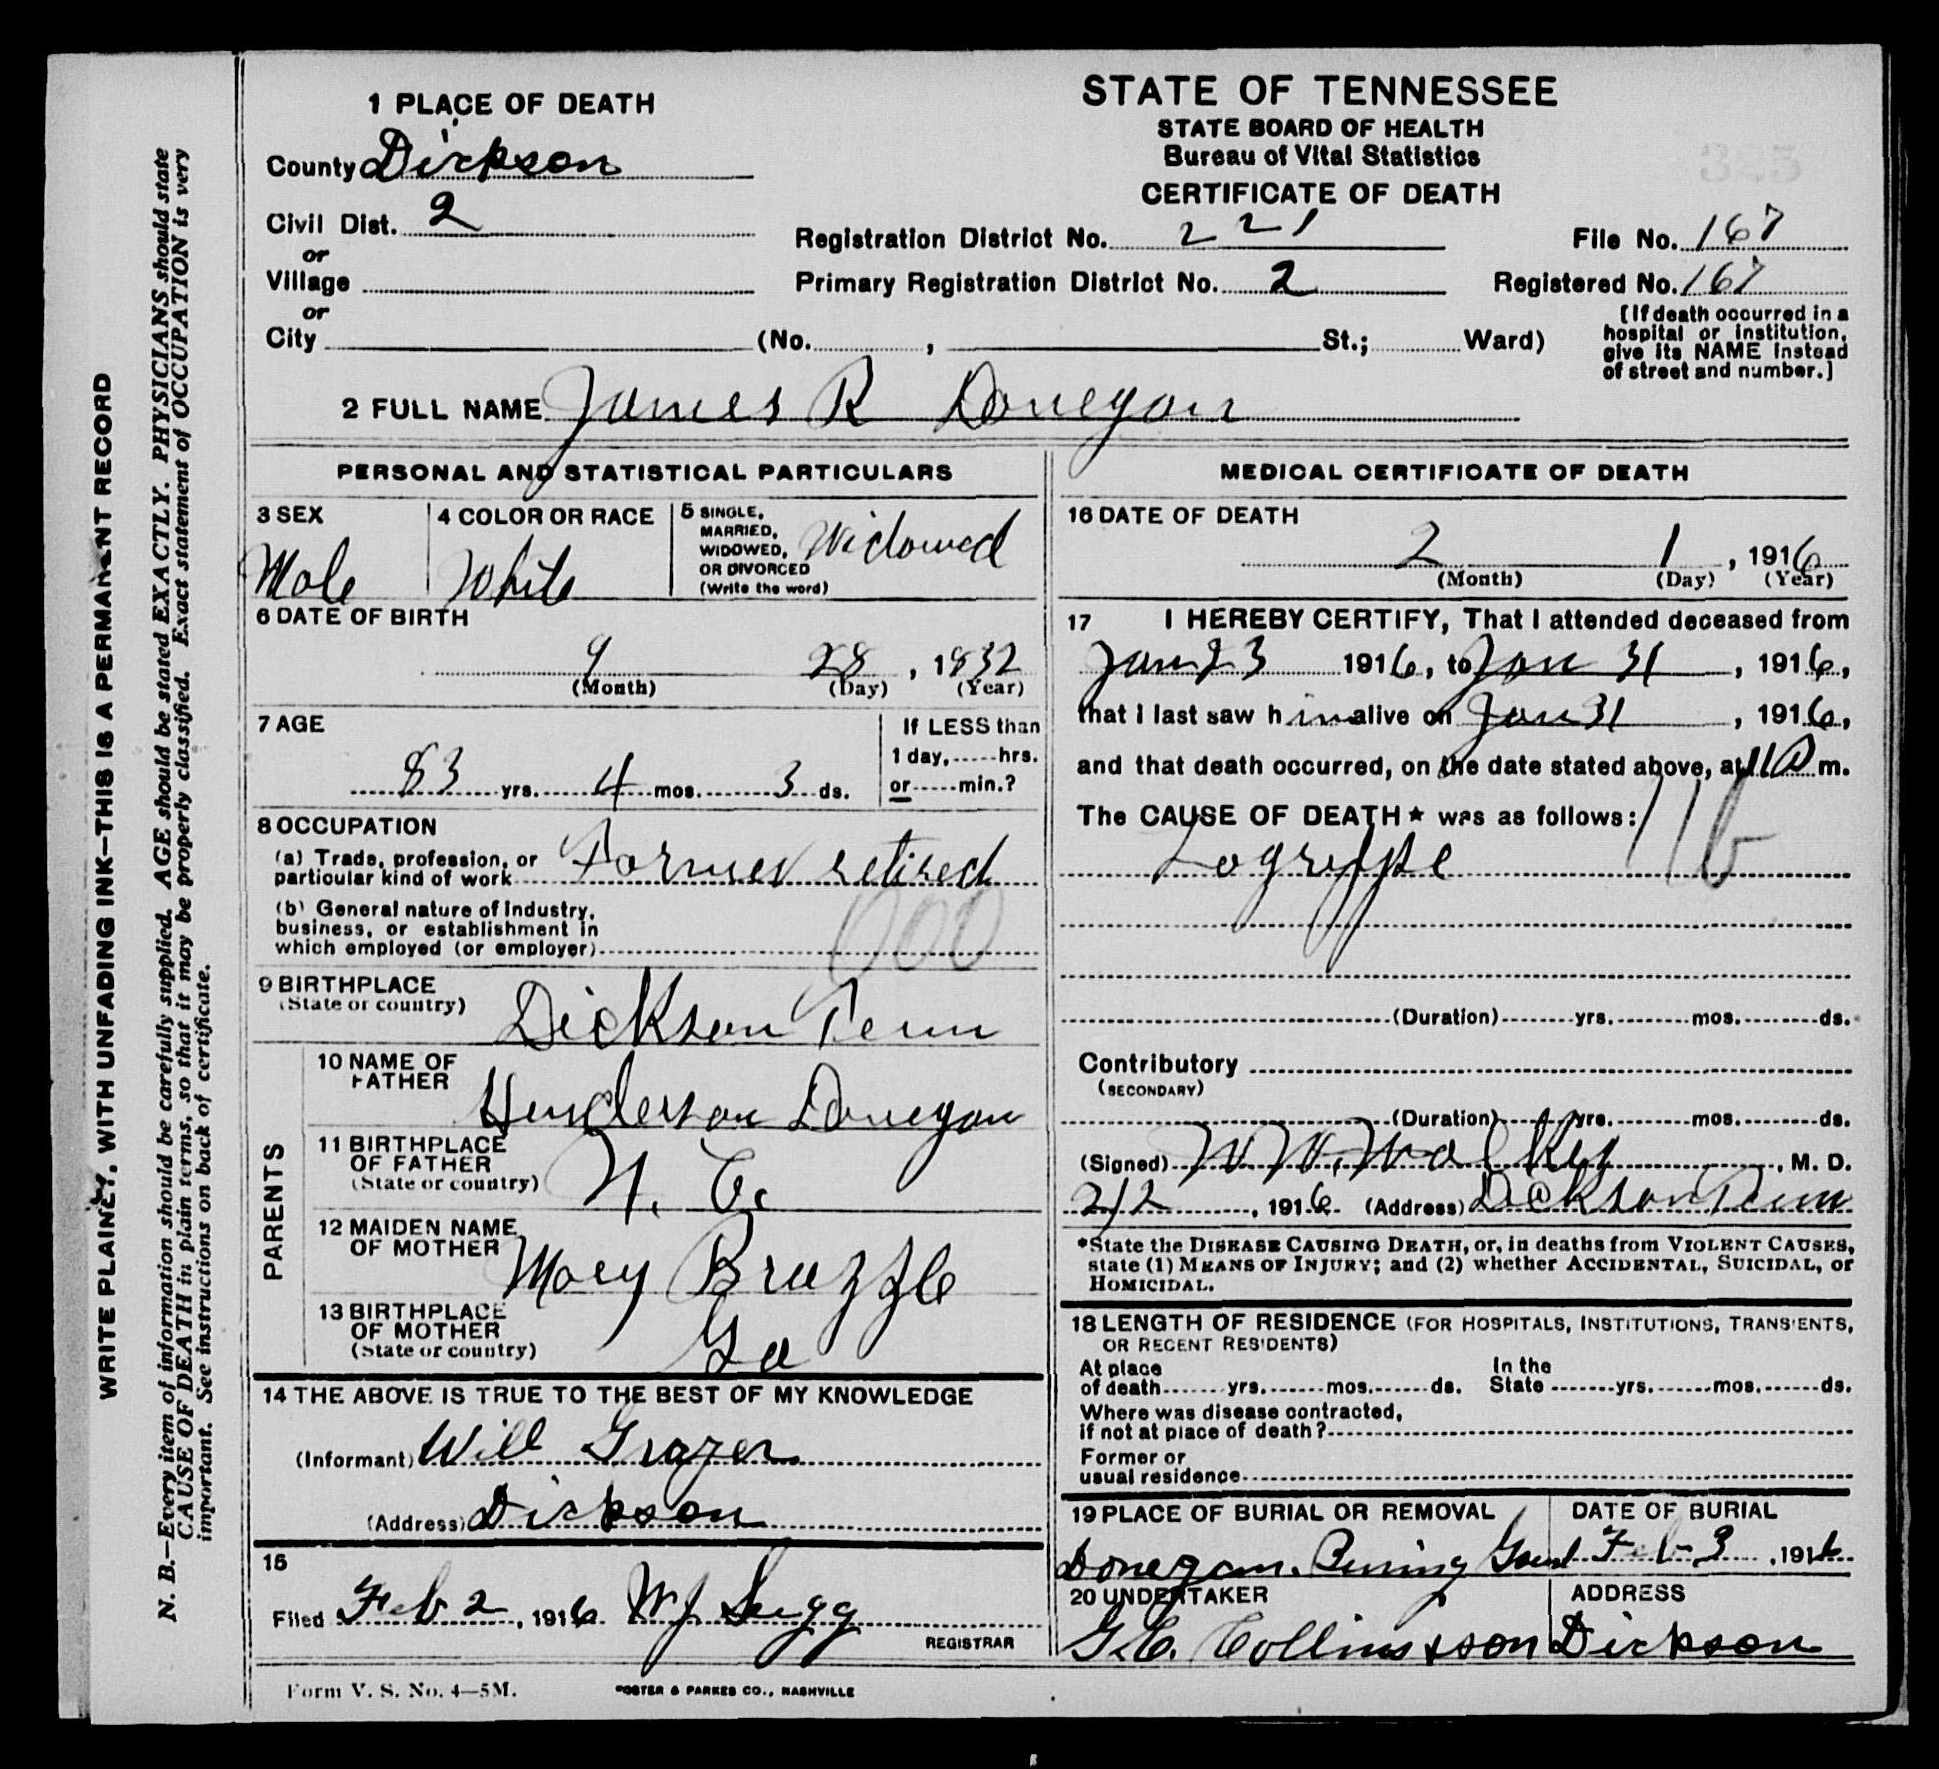 James Riley Donegan, death certificate, 1916, Dickson County, Tennessee